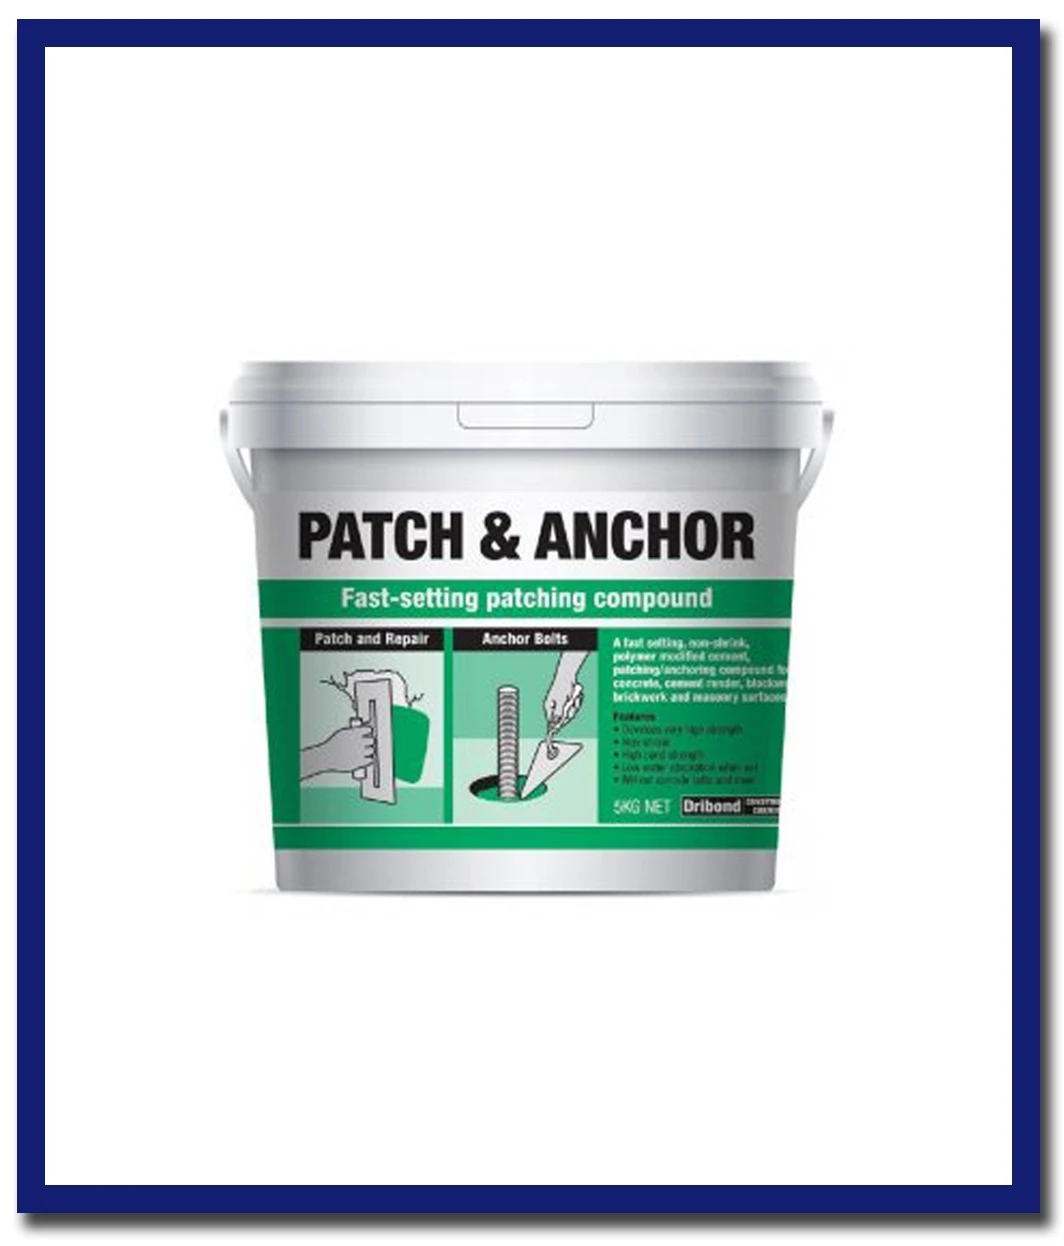 Dribond Patch & Anchor Fast Setting Patching Compound - Stone Doctor Australia - Construction Chemical > Repair > Patching Compound